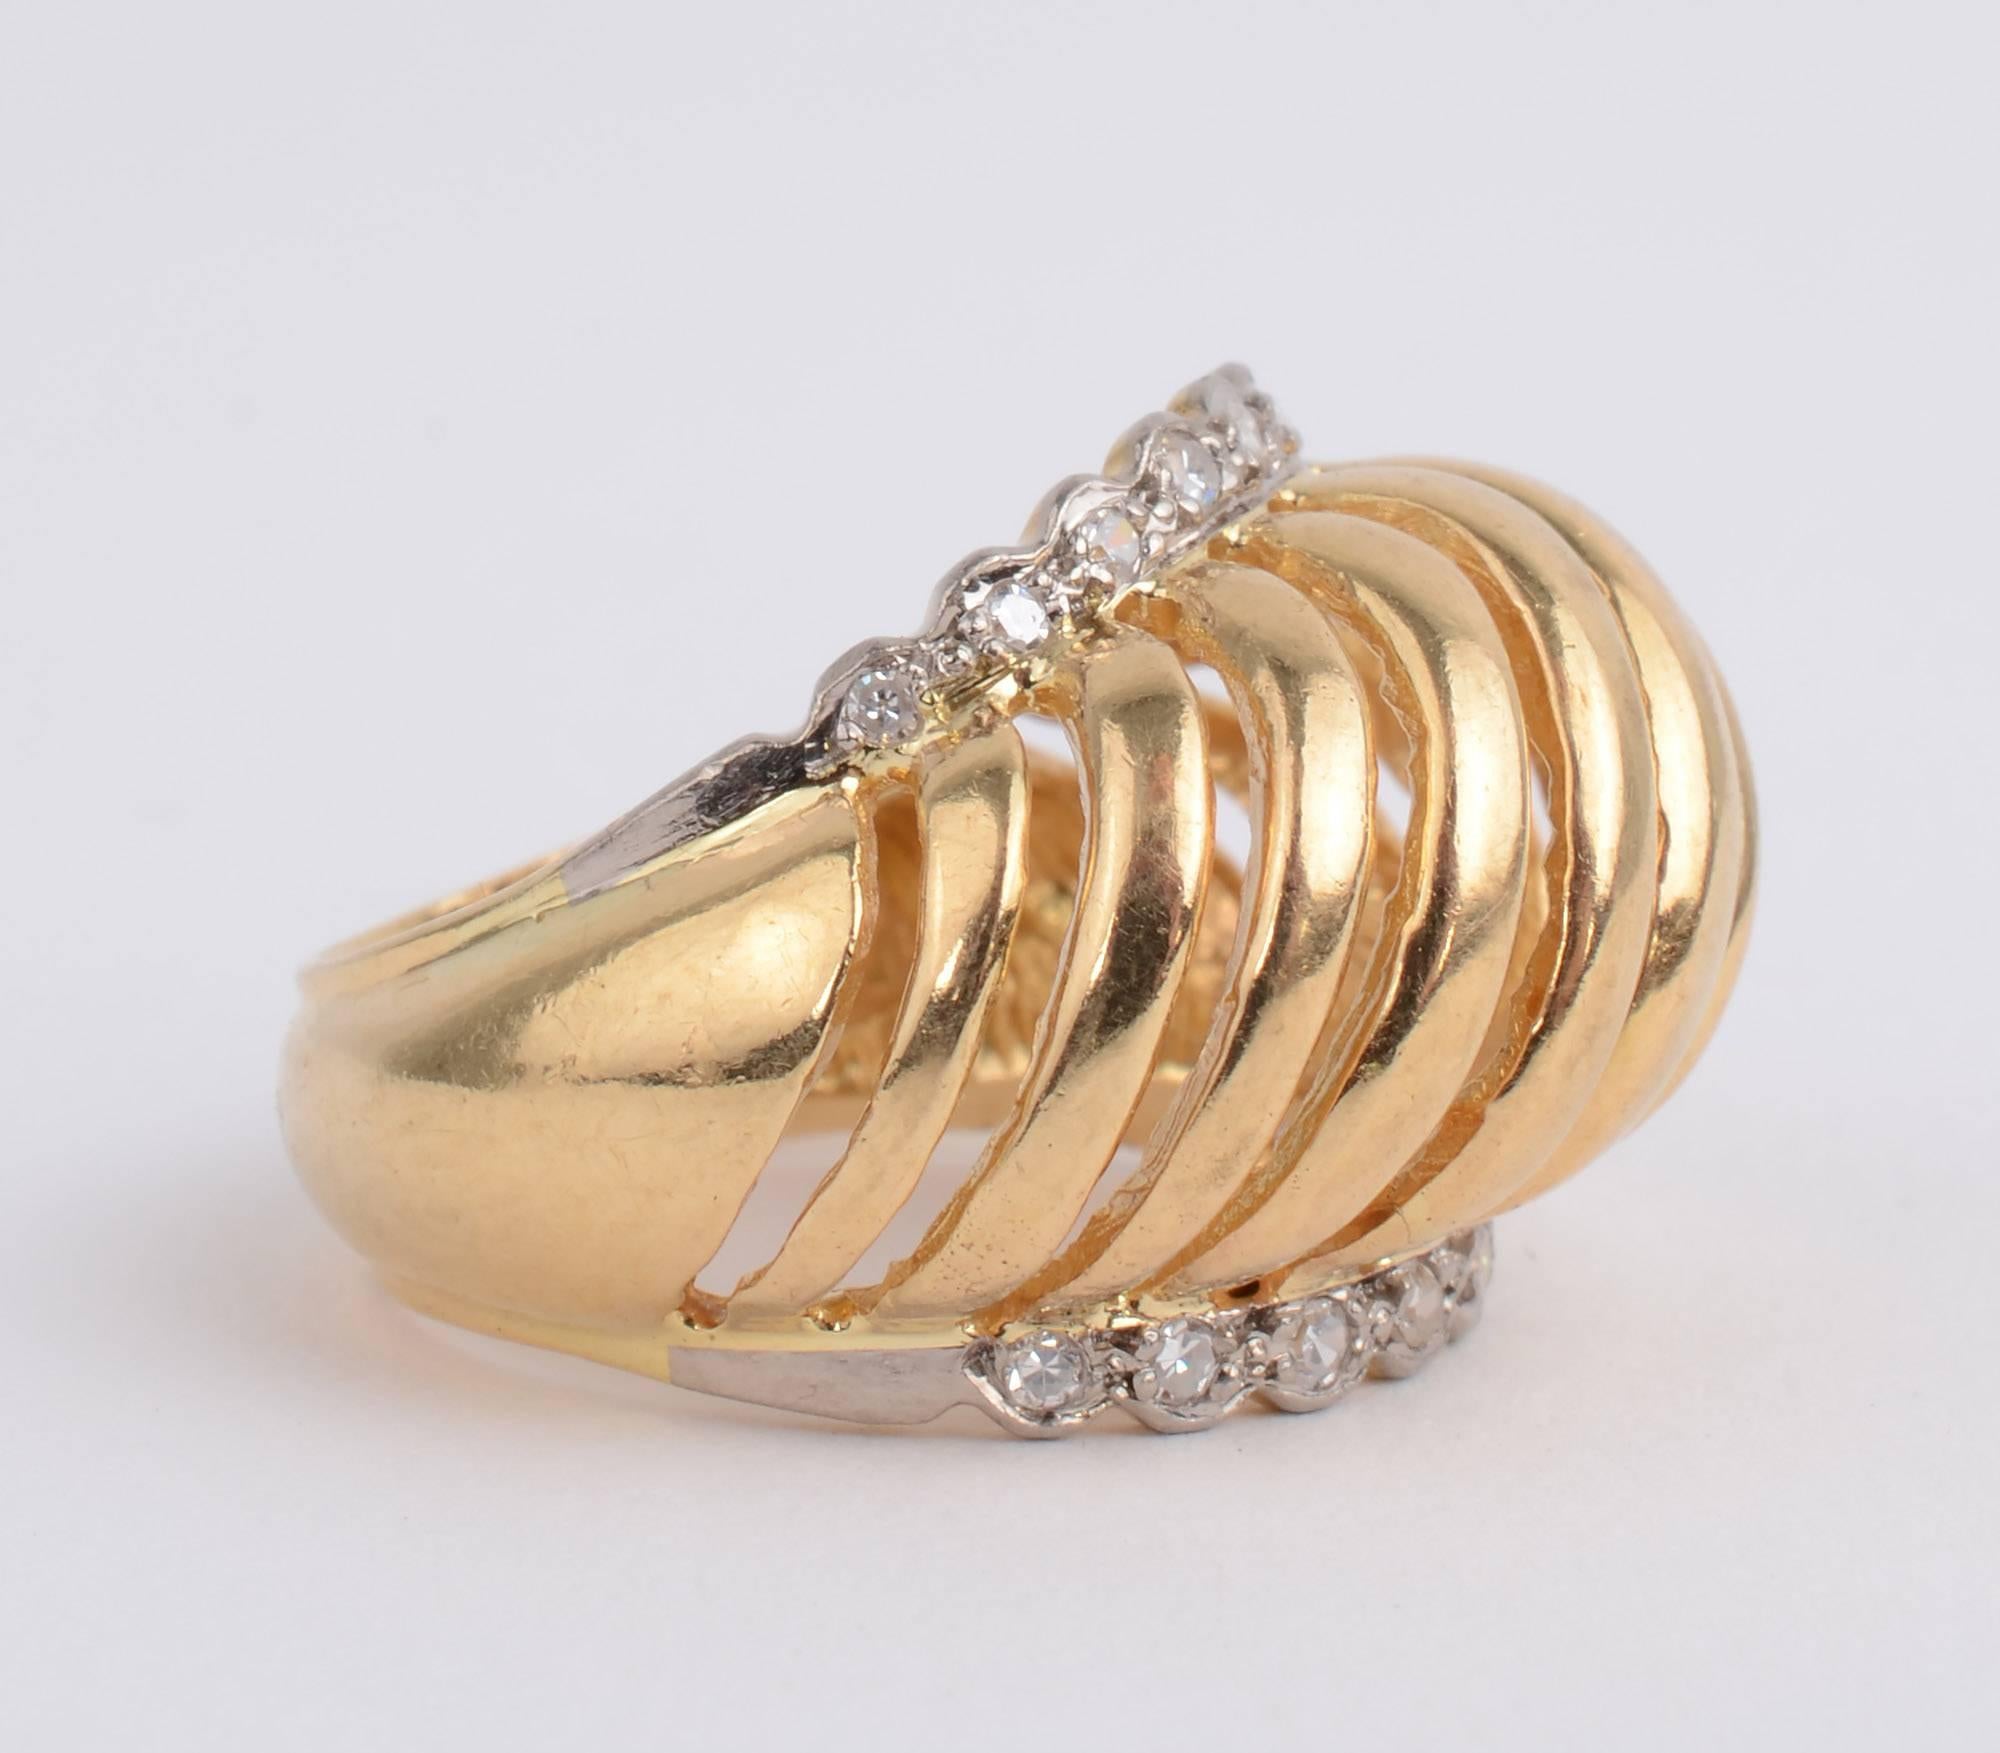 This domed gold ring with diamonds is an unusual one for the Greek designer, Ilias Lalaounis. The domed part is made of graduated width bands of gold alternating with open spaces. The dome is hugged by diamonds on top and bottom. The dome is 1/4